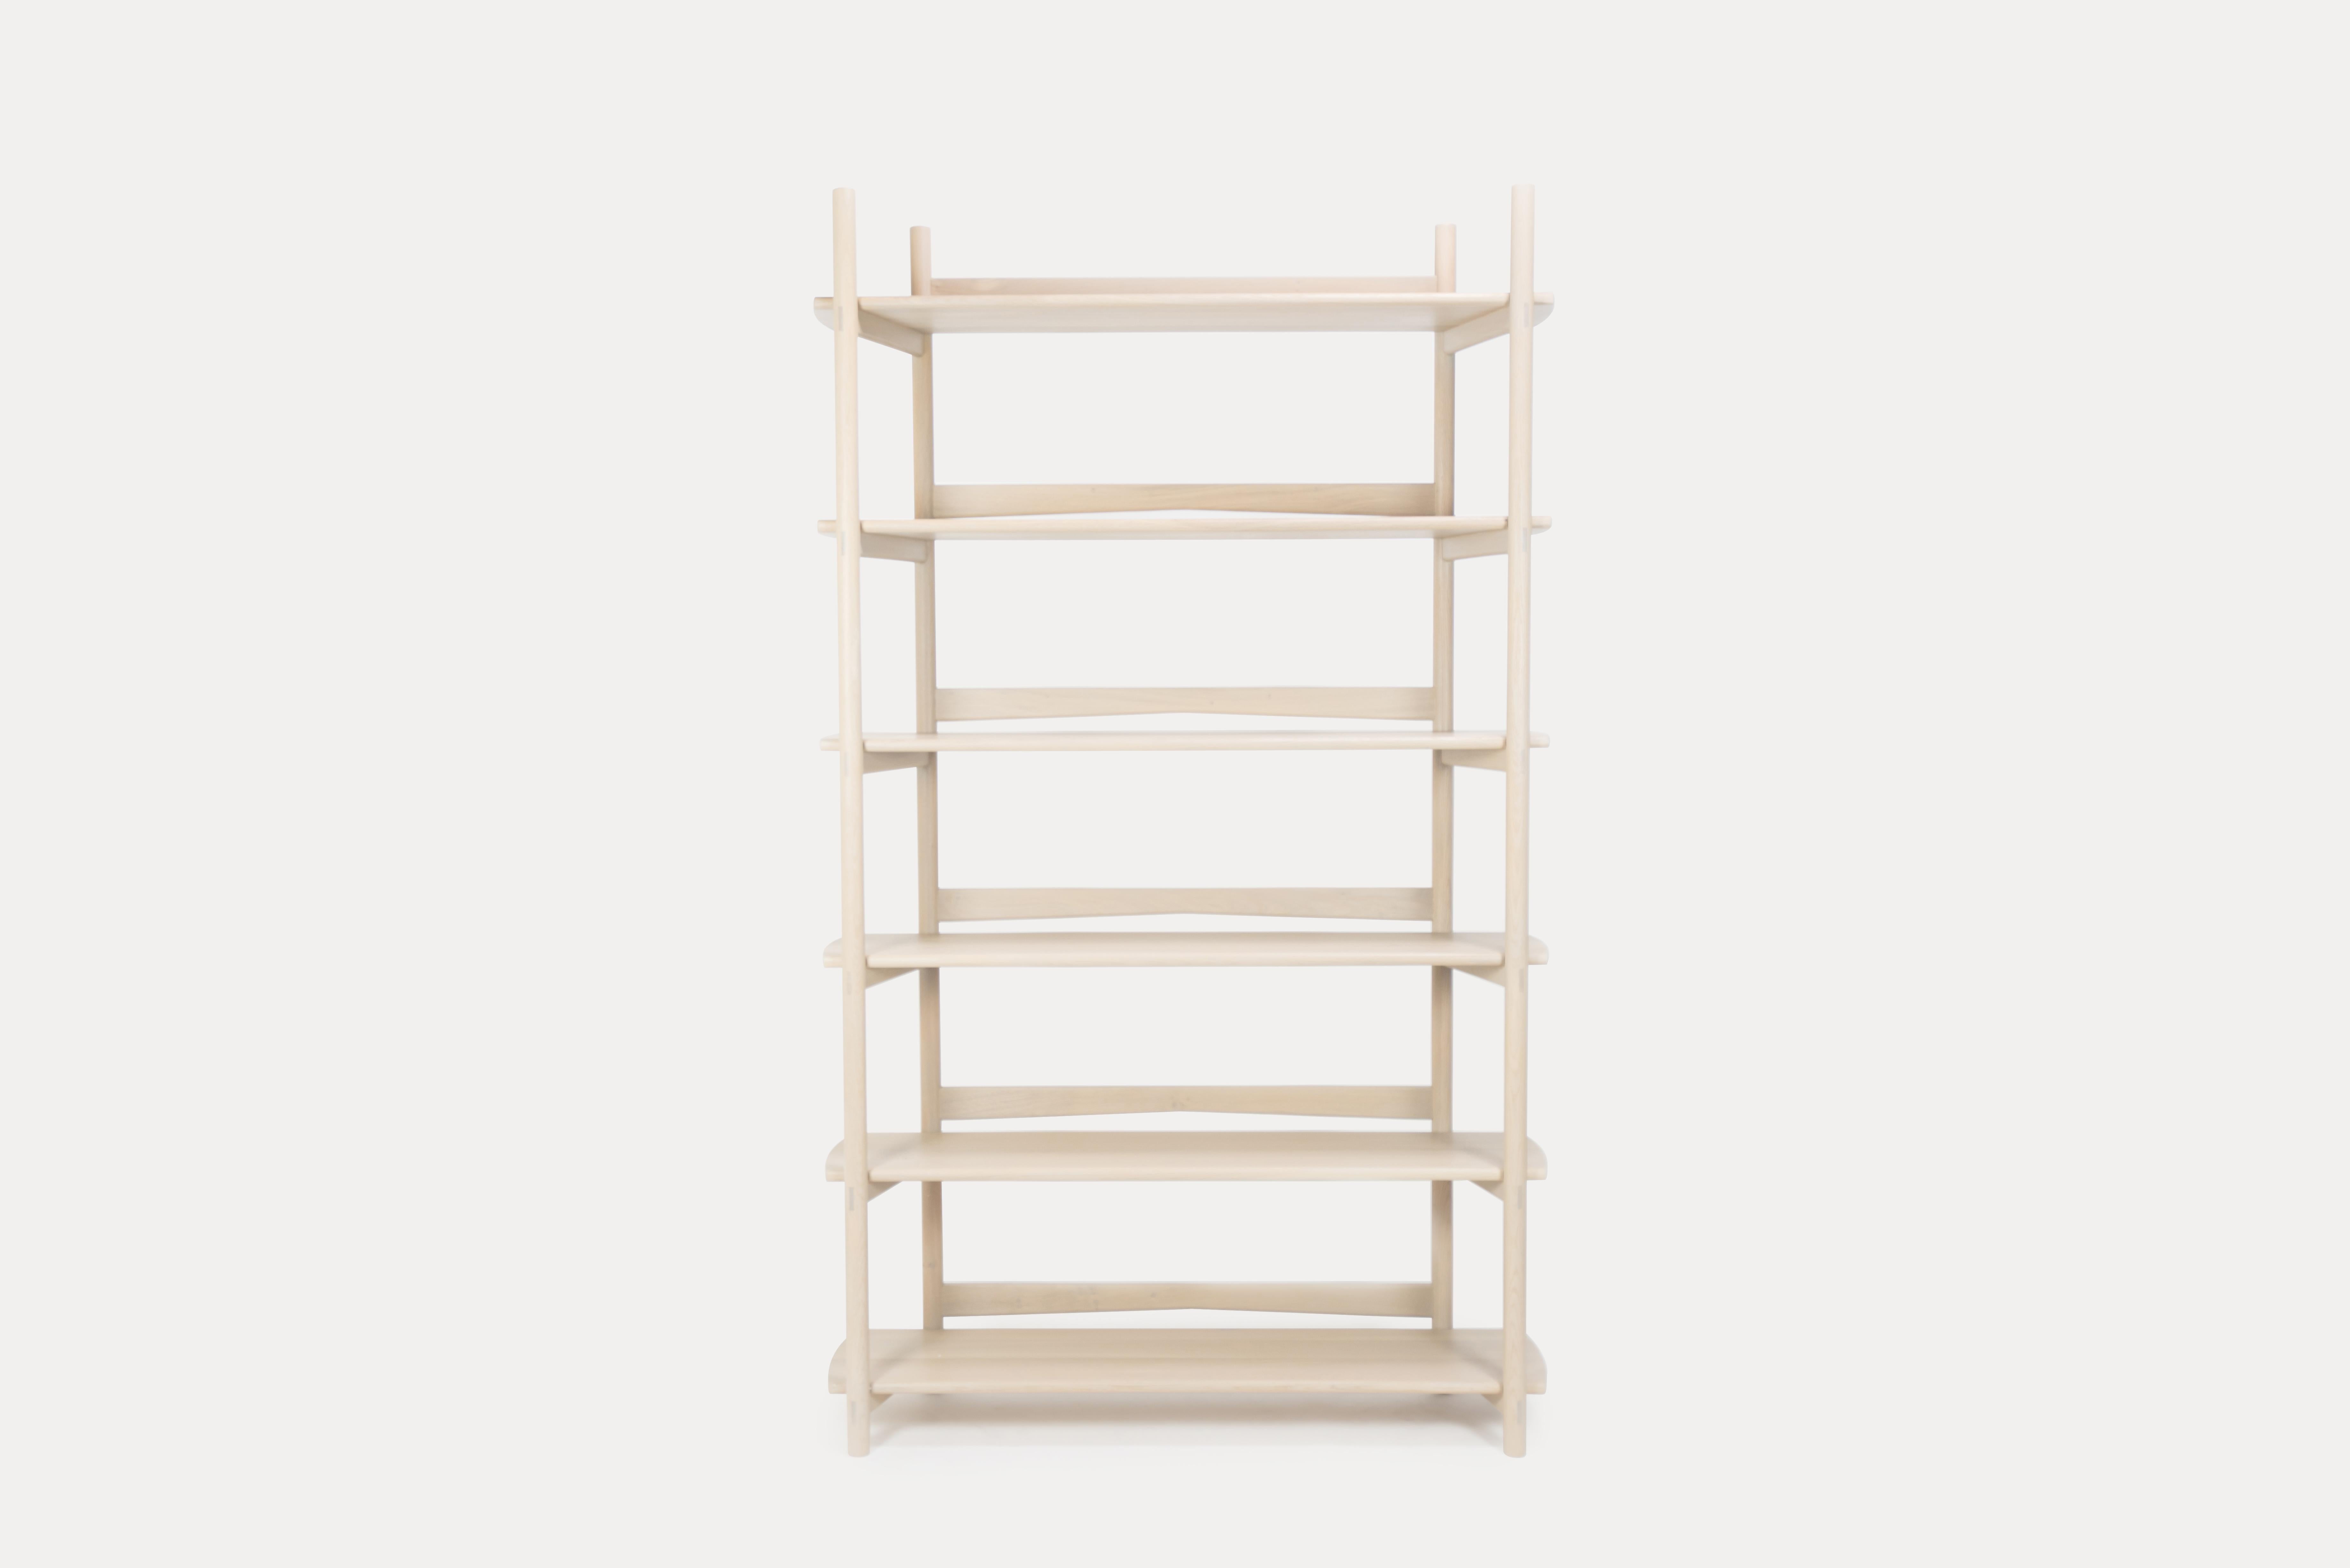 Sun at Six is a Brooklyn design studio. We work with traditional Chinese joinery masters to handcraft our pieces using traditional joinery. The Mora bookcase comes fully assembled, built from solid white oak, finished in our house made tung oil, and